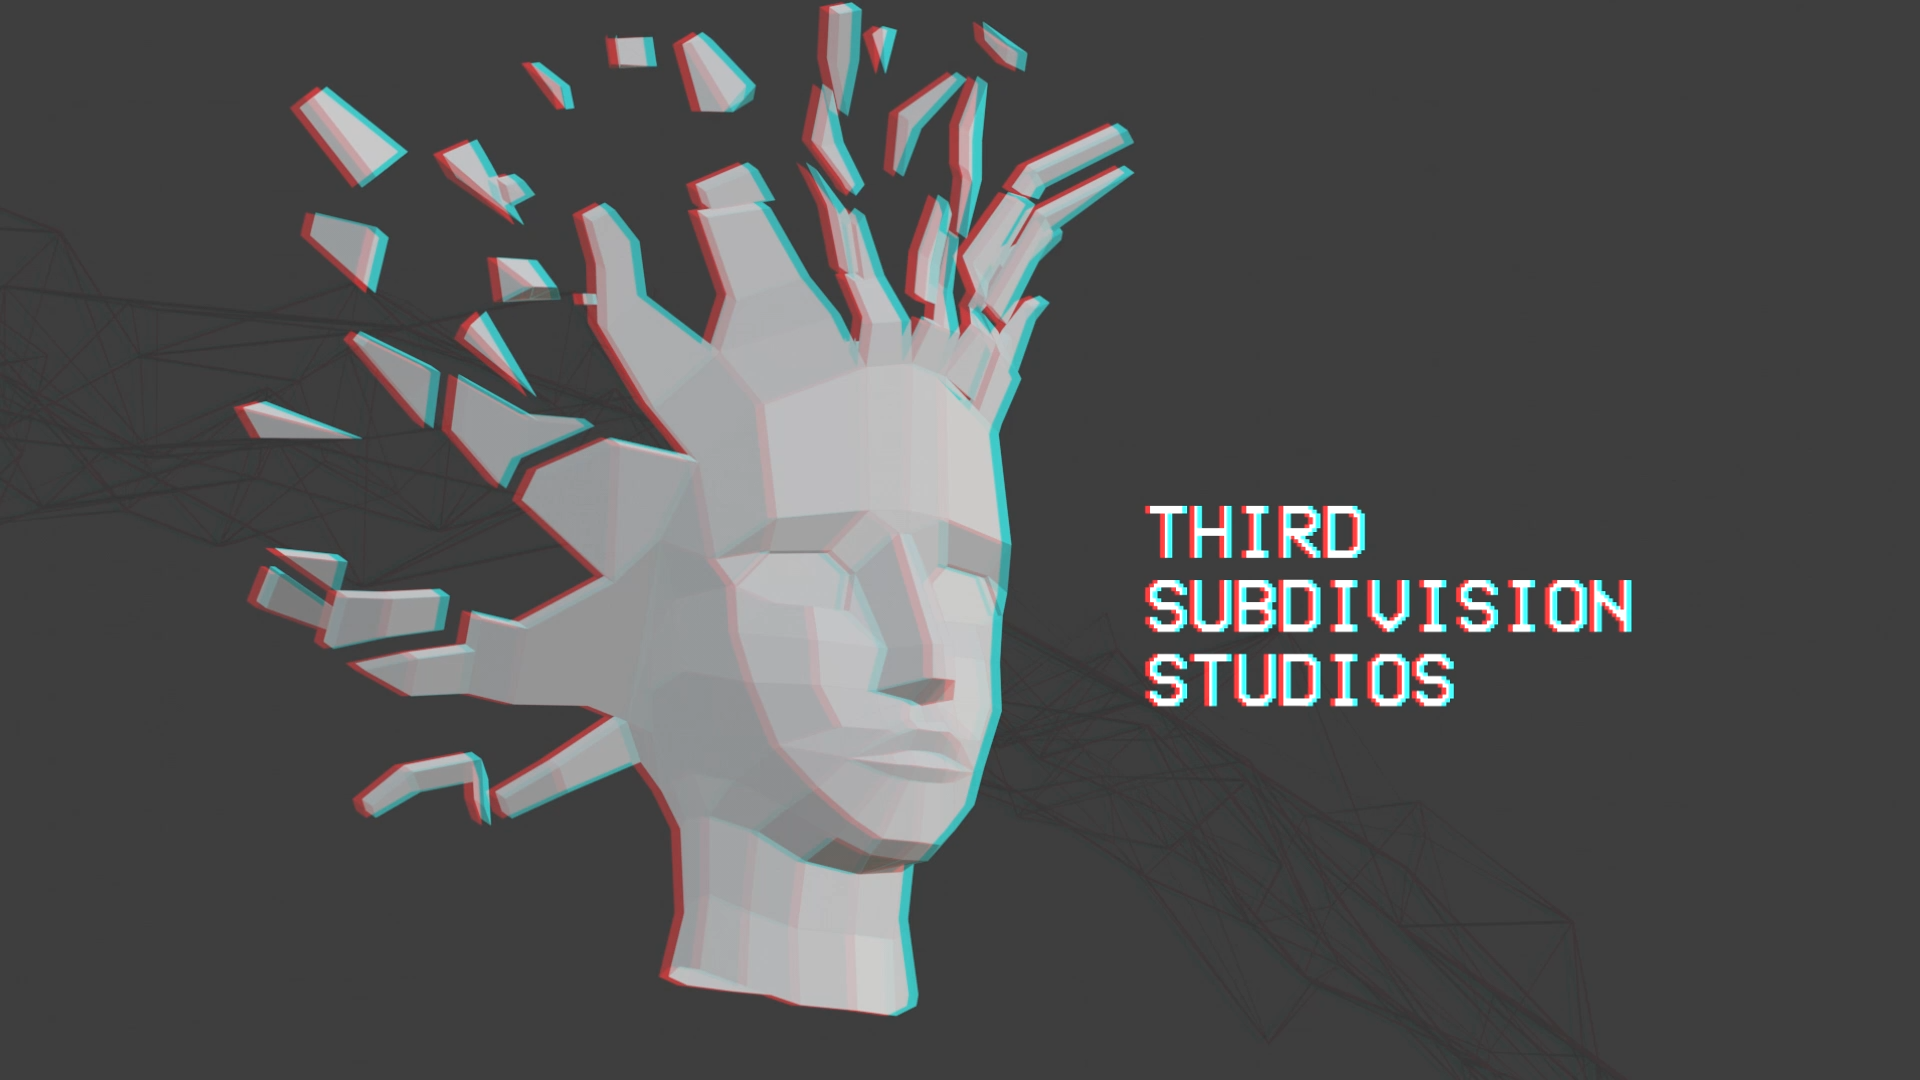 SCP Containment Breach Title Card by wibblethefish on DeviantArt